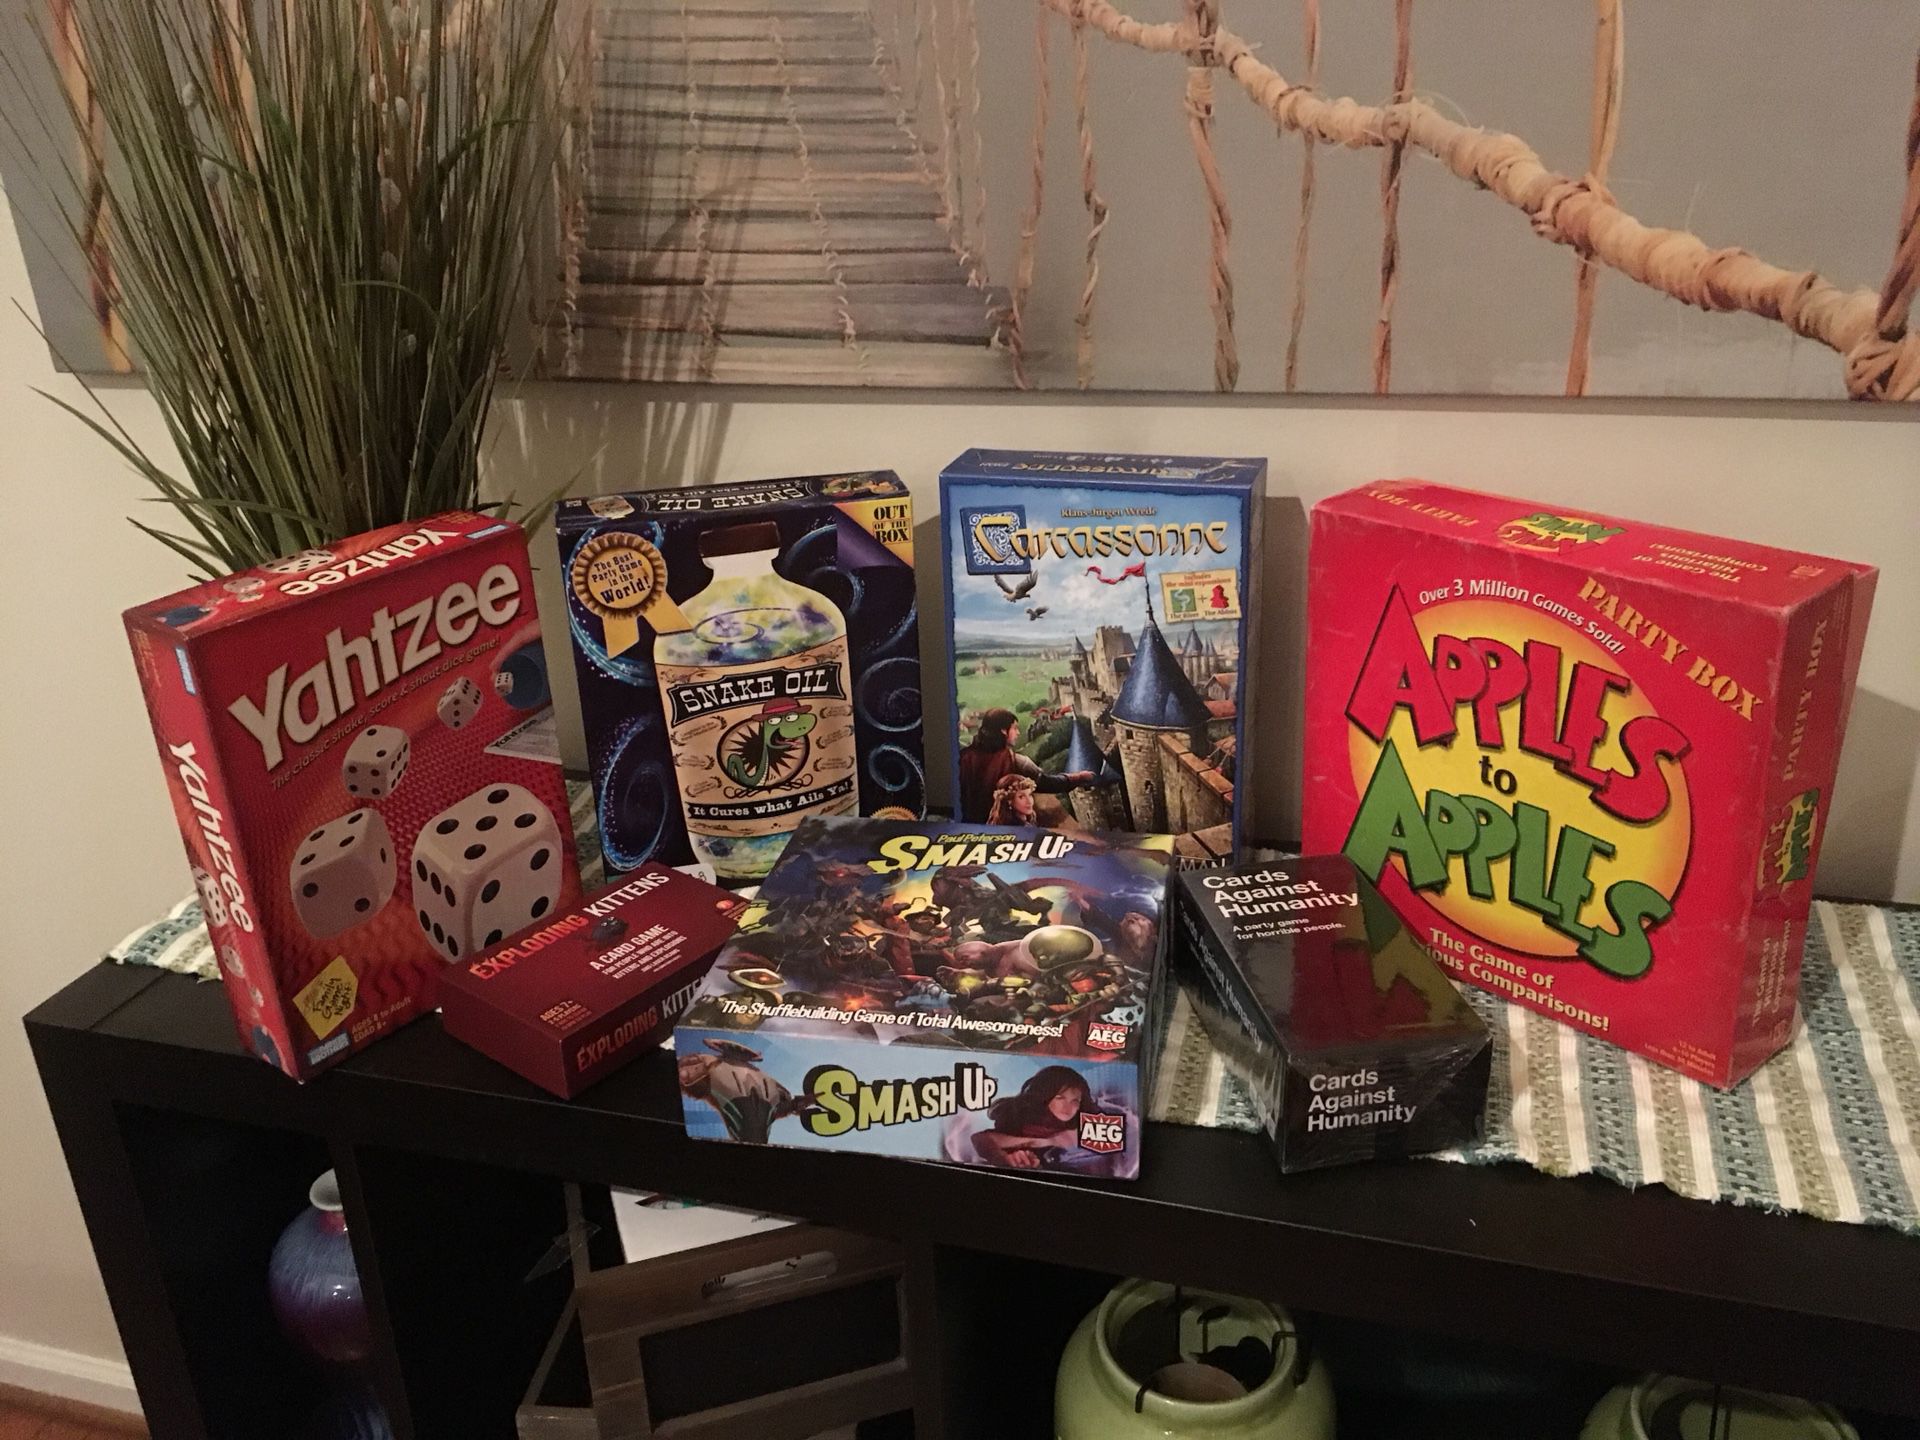 Popular Modern and Strategy Board Game Lot Snake Oil, Cards Against Humanity, Carcassonne, Exploding Kittens, and more!